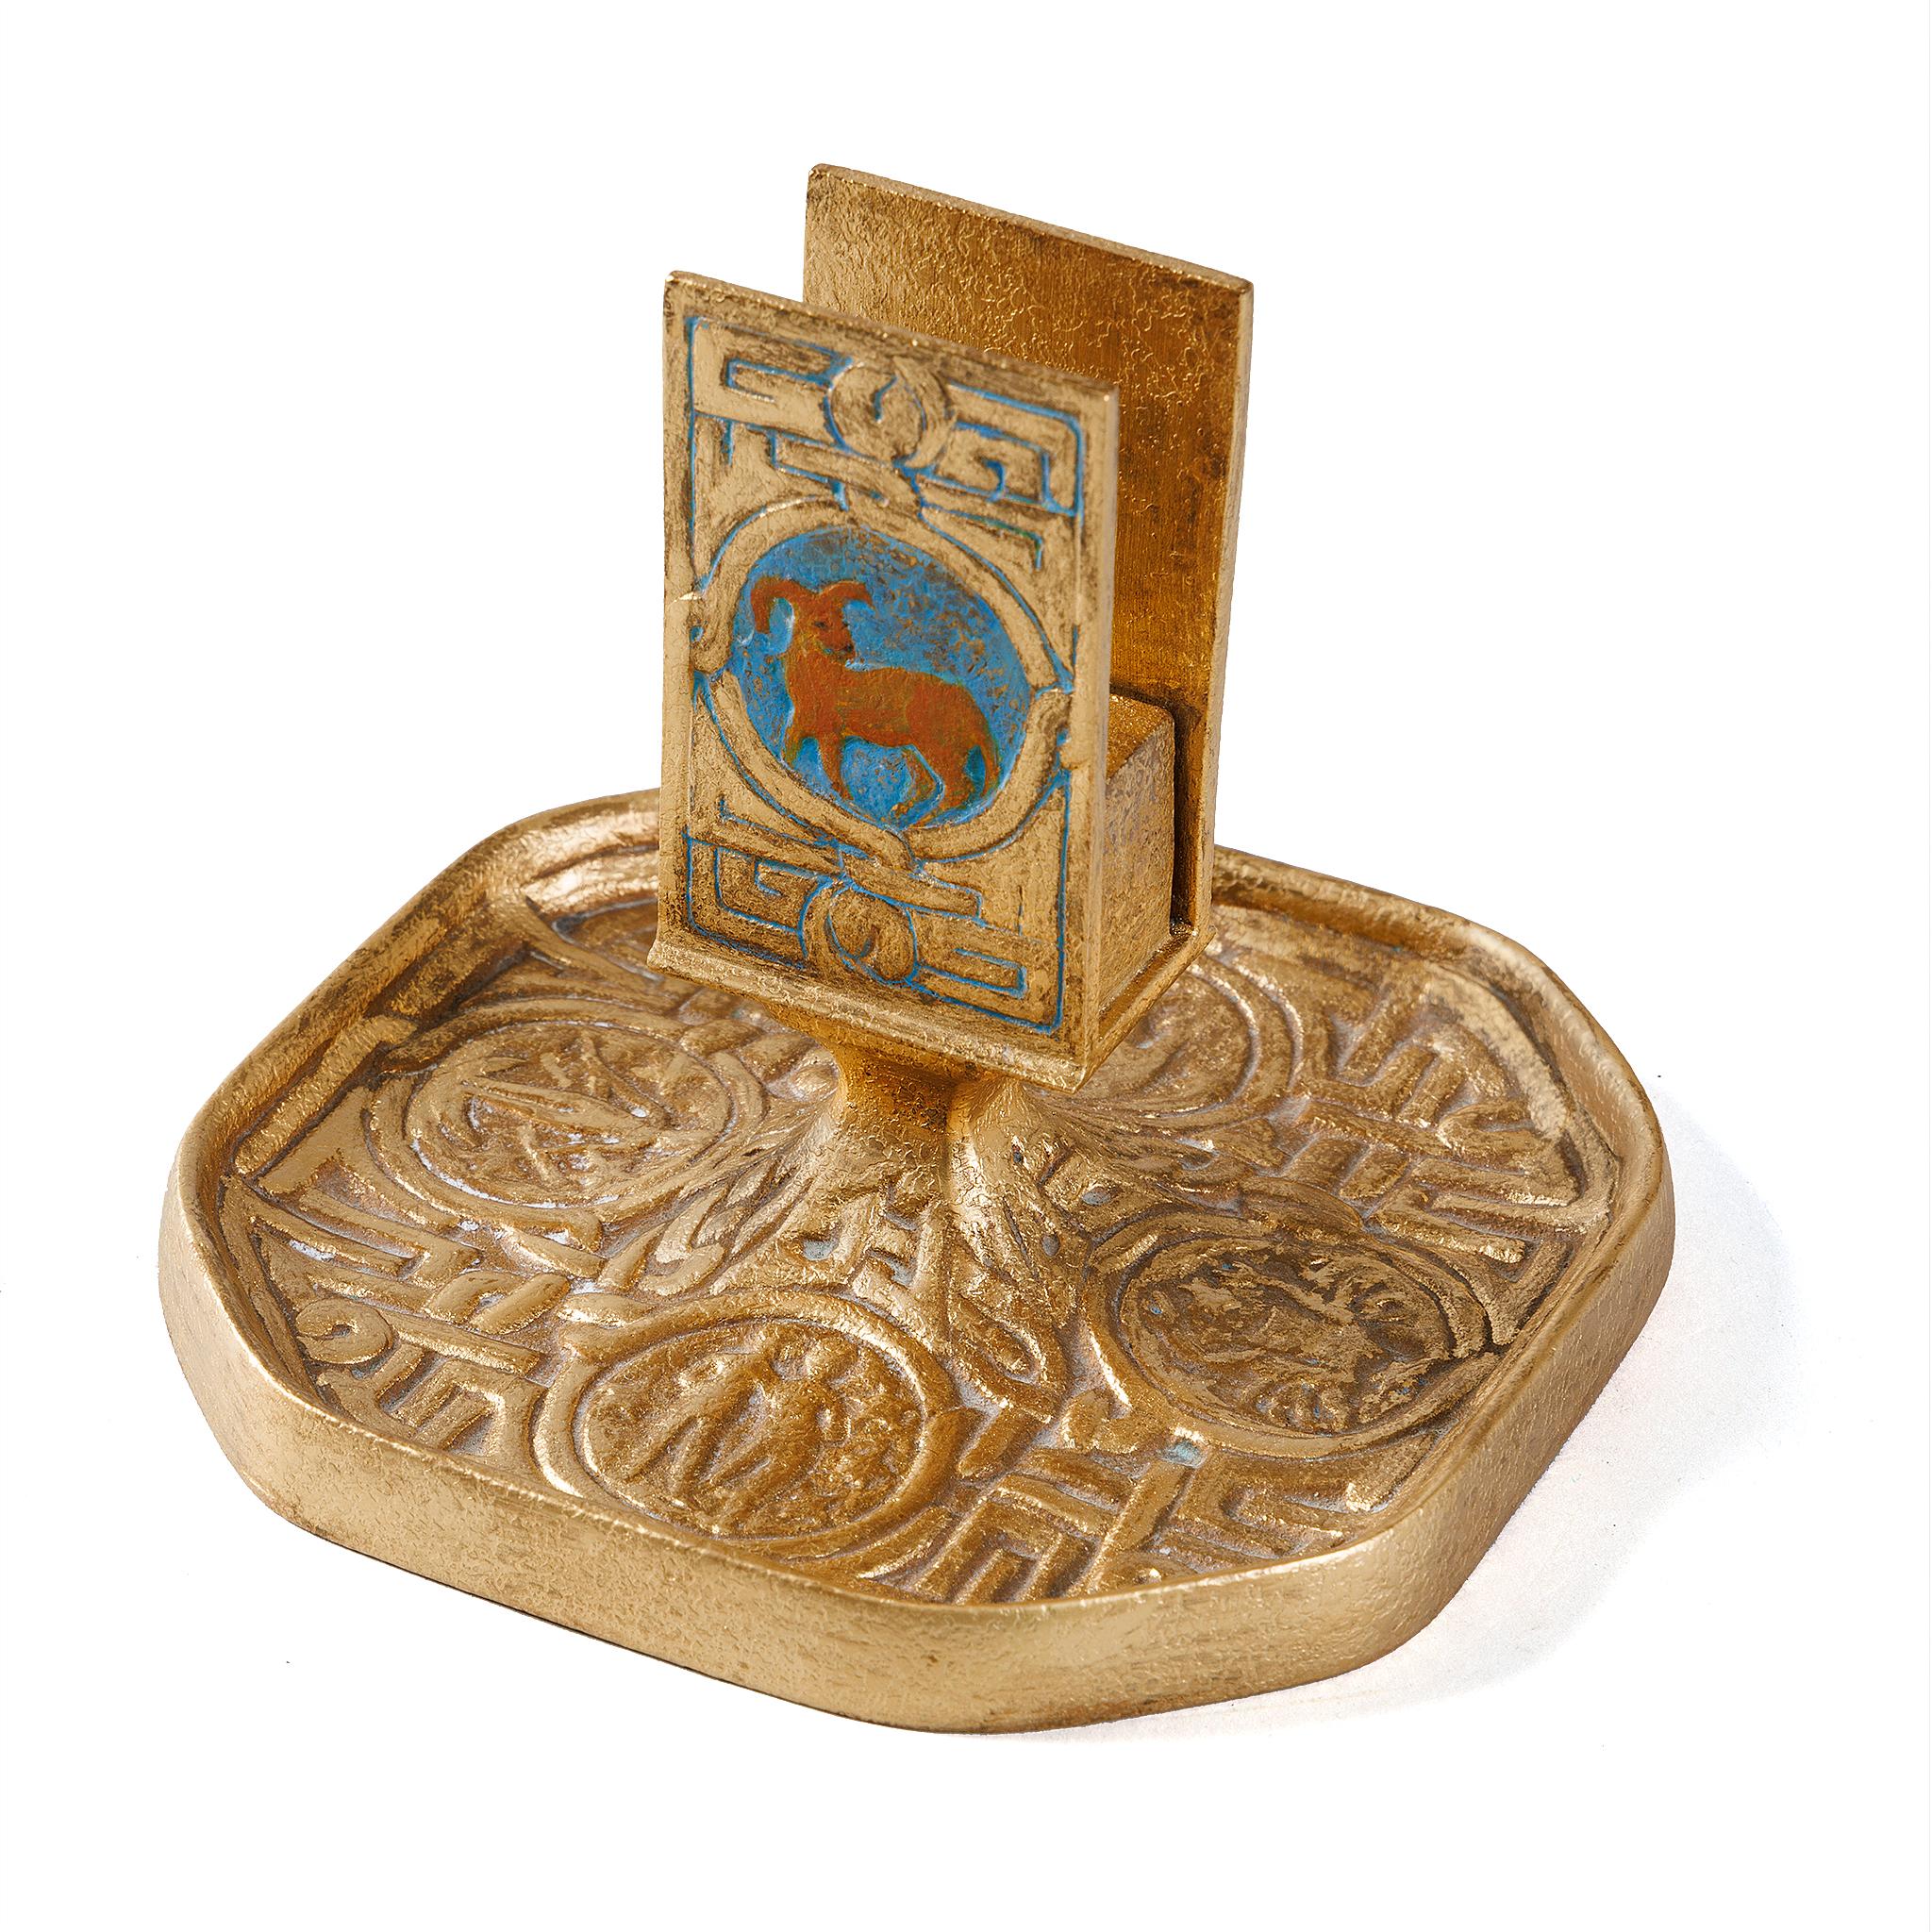 A gilt bronze “Zodiac” match box holder by Tiffany Studios New York. The match box holder features intricate pseudo-Celtic patterning interspersed with circular elements in sky blue, each of which features a stylized depiction of one of the 12 signs